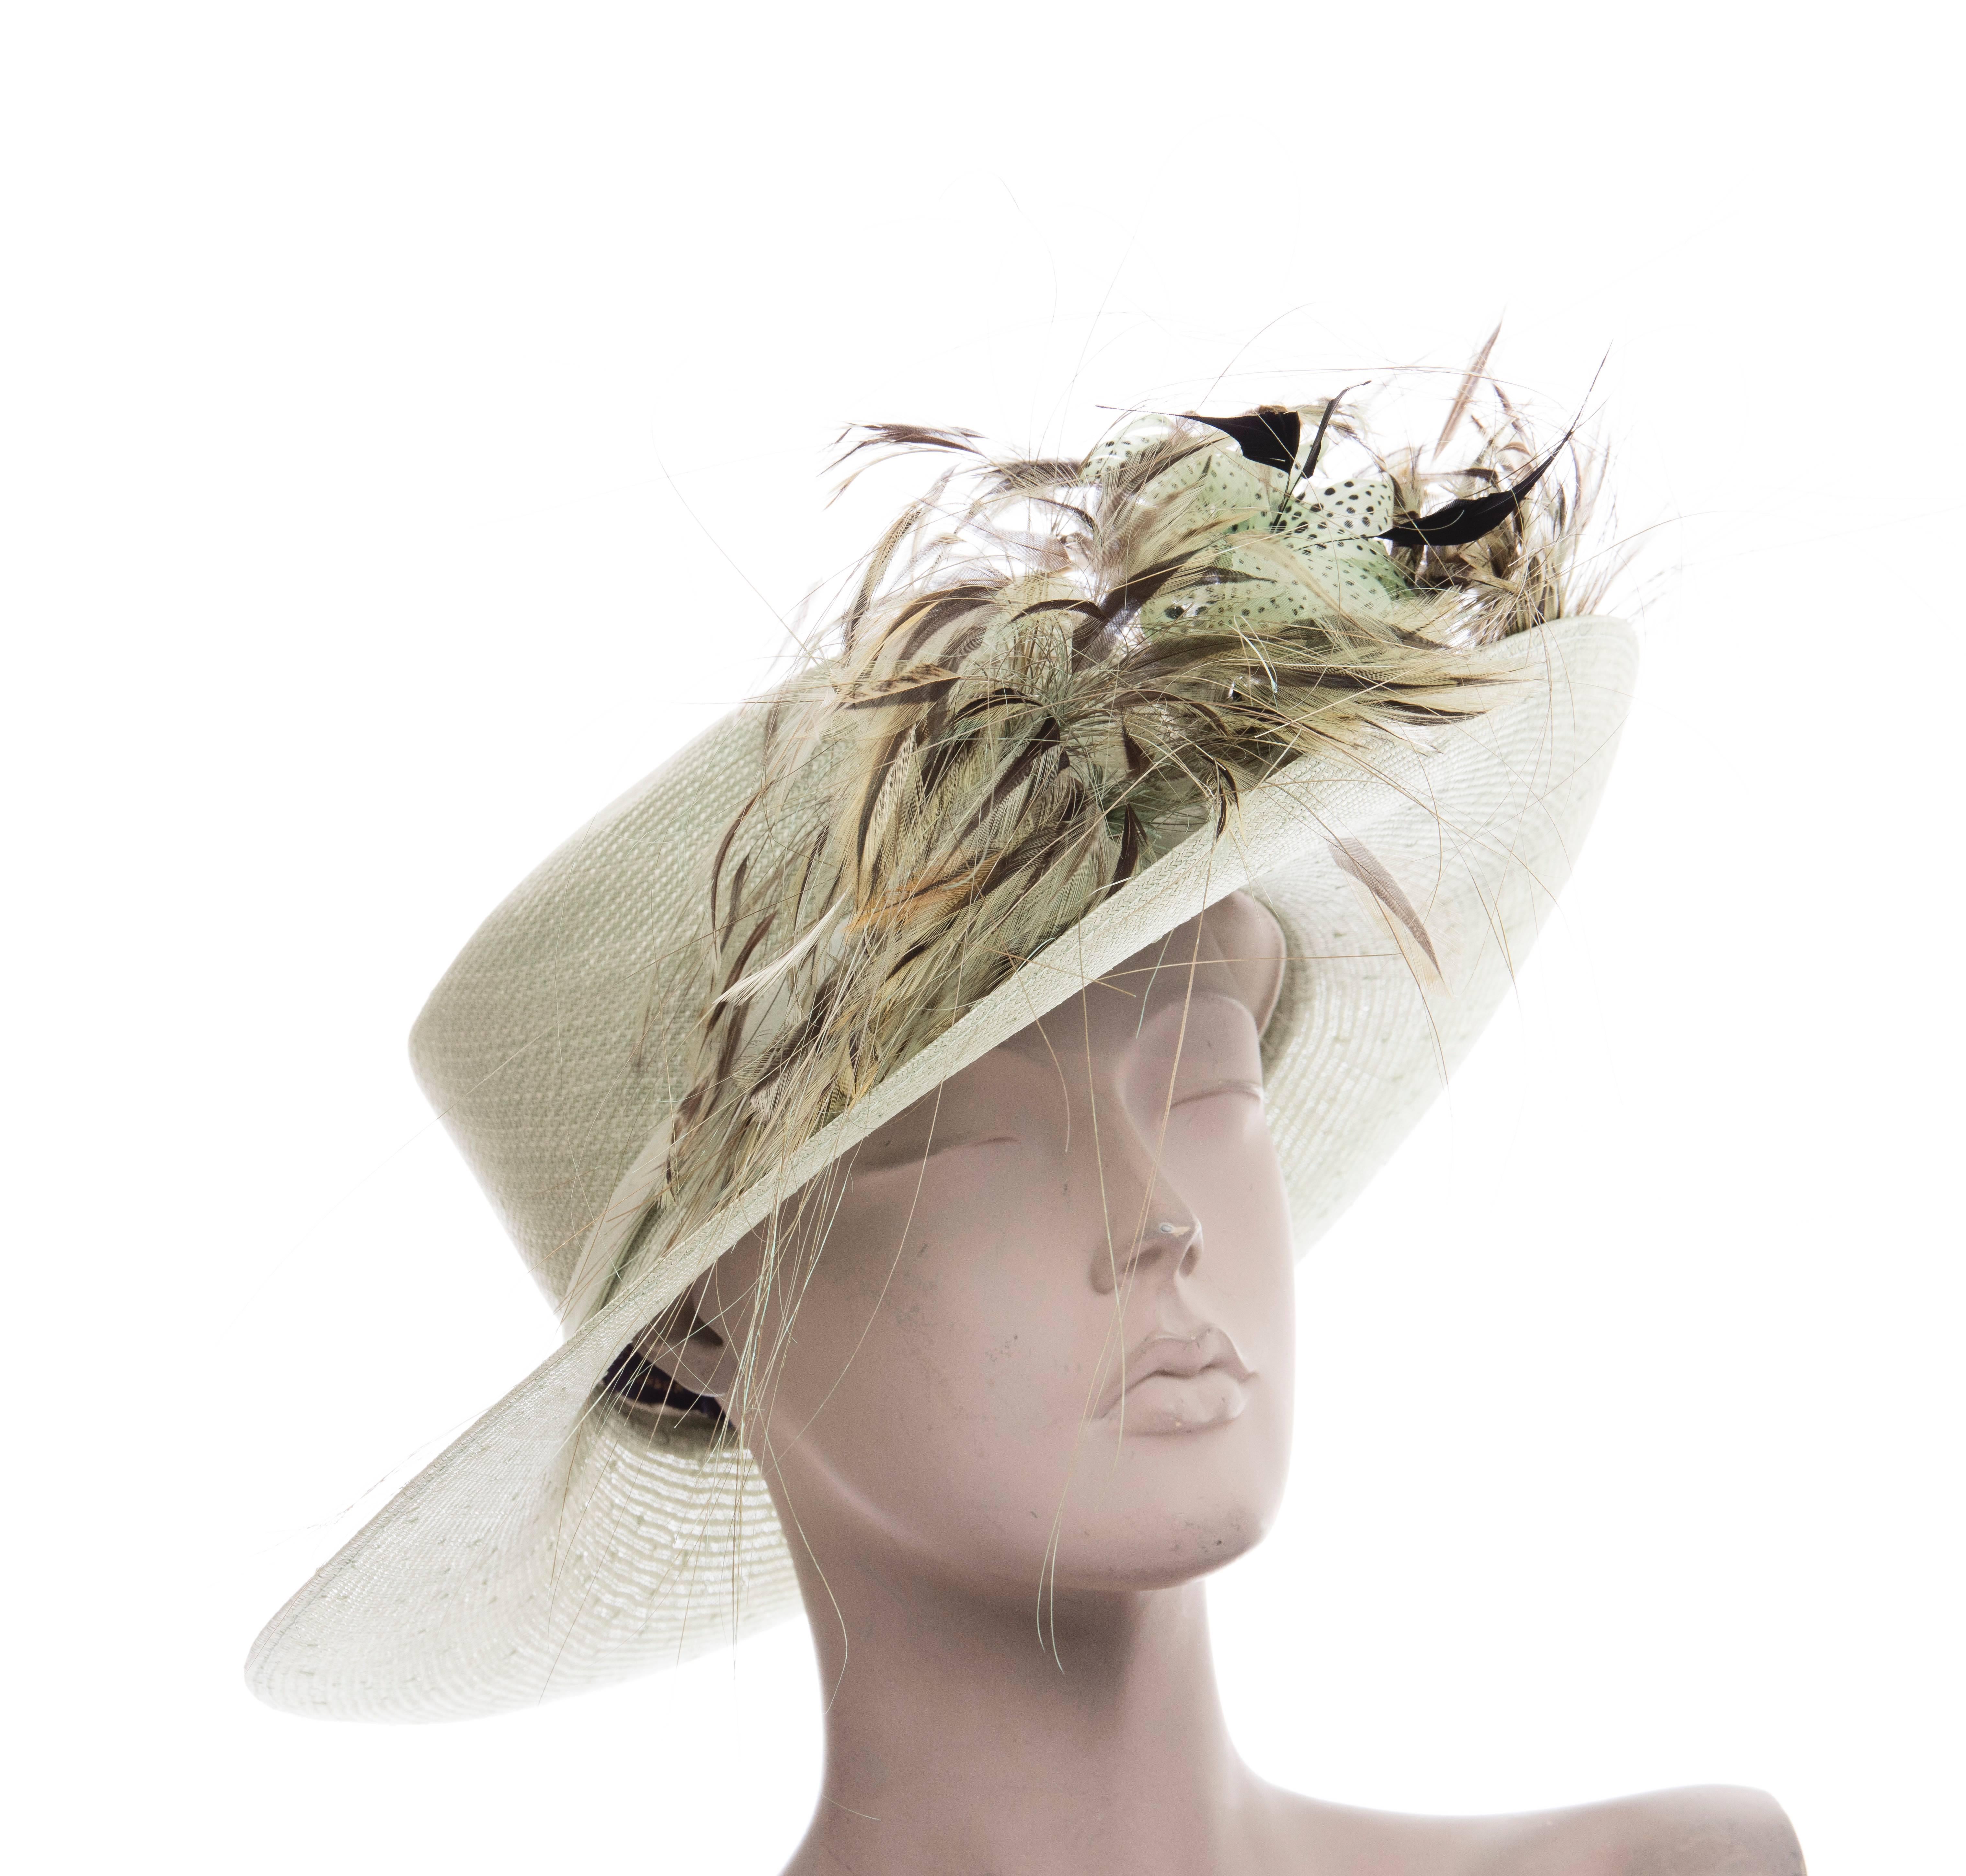  Philip Treacy sinamay derby hat with oversize feather accent. Includes box.

Circumference 22”, Brim 5”